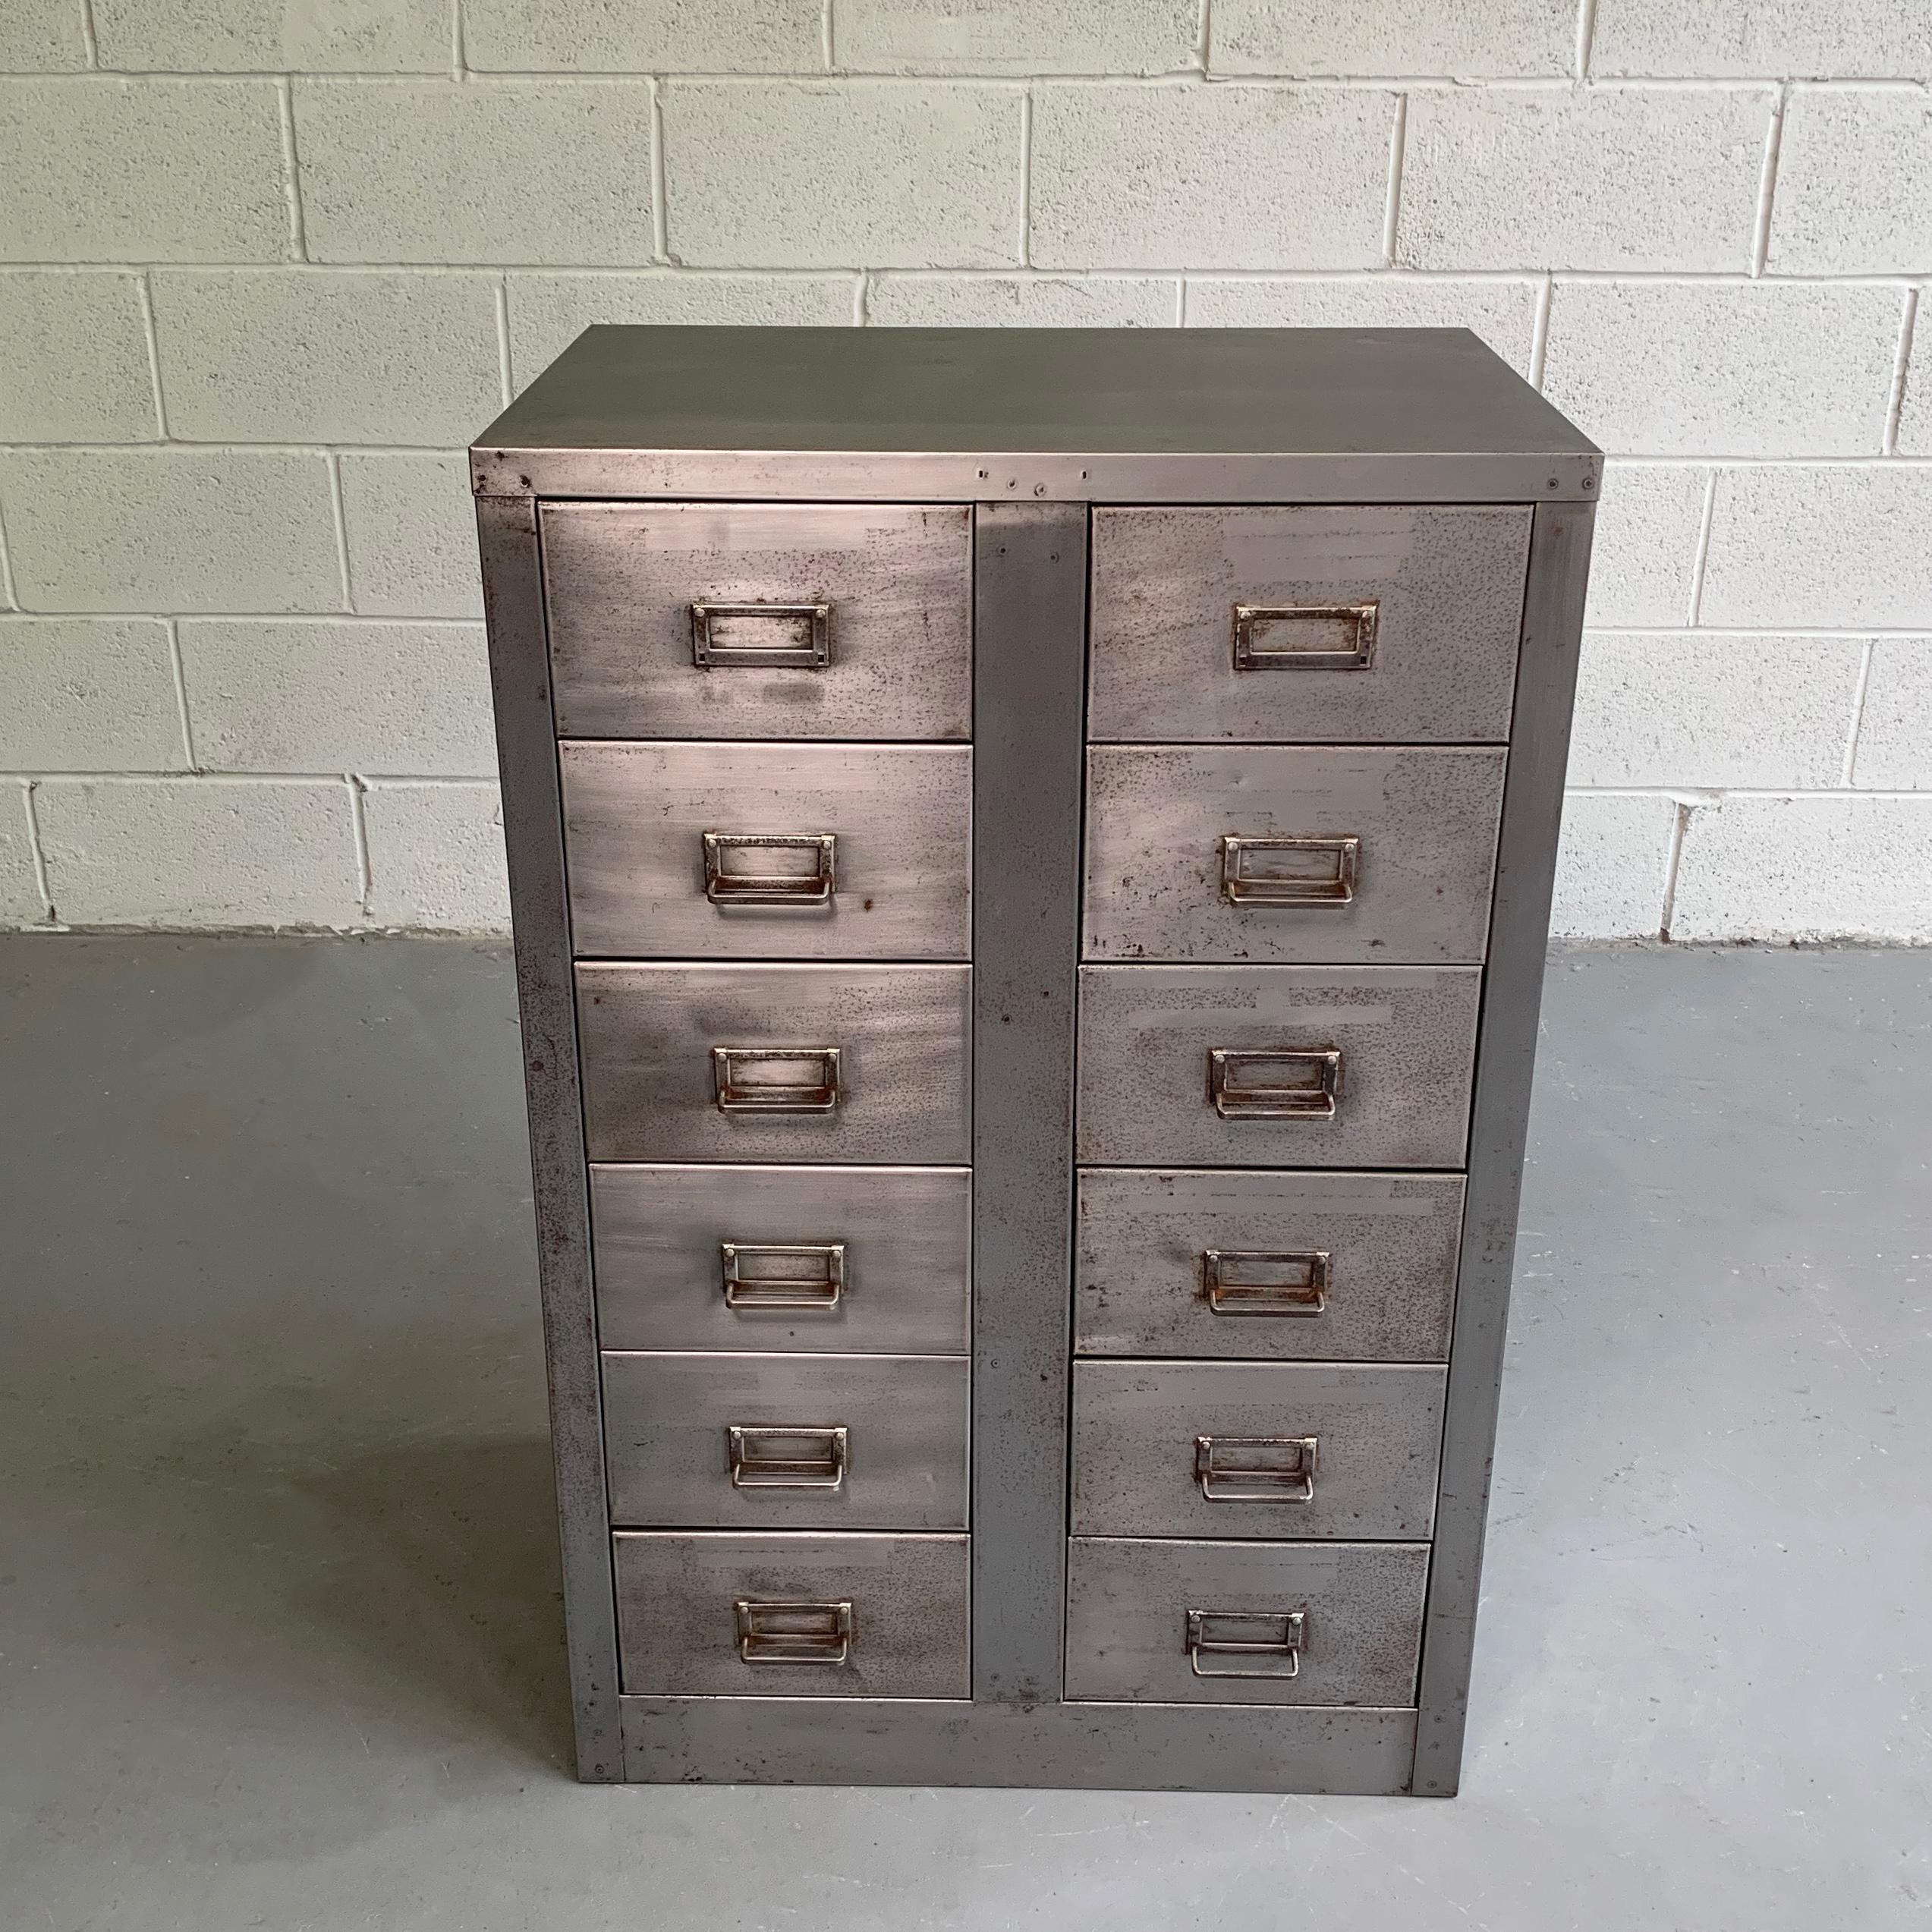 Midcentury, Industrial, 10 drawer, office filing cabinet features a brushed steel finish with brass label plate pulls. The drawers measure 5.25 inches, height 9.25, inches wide.